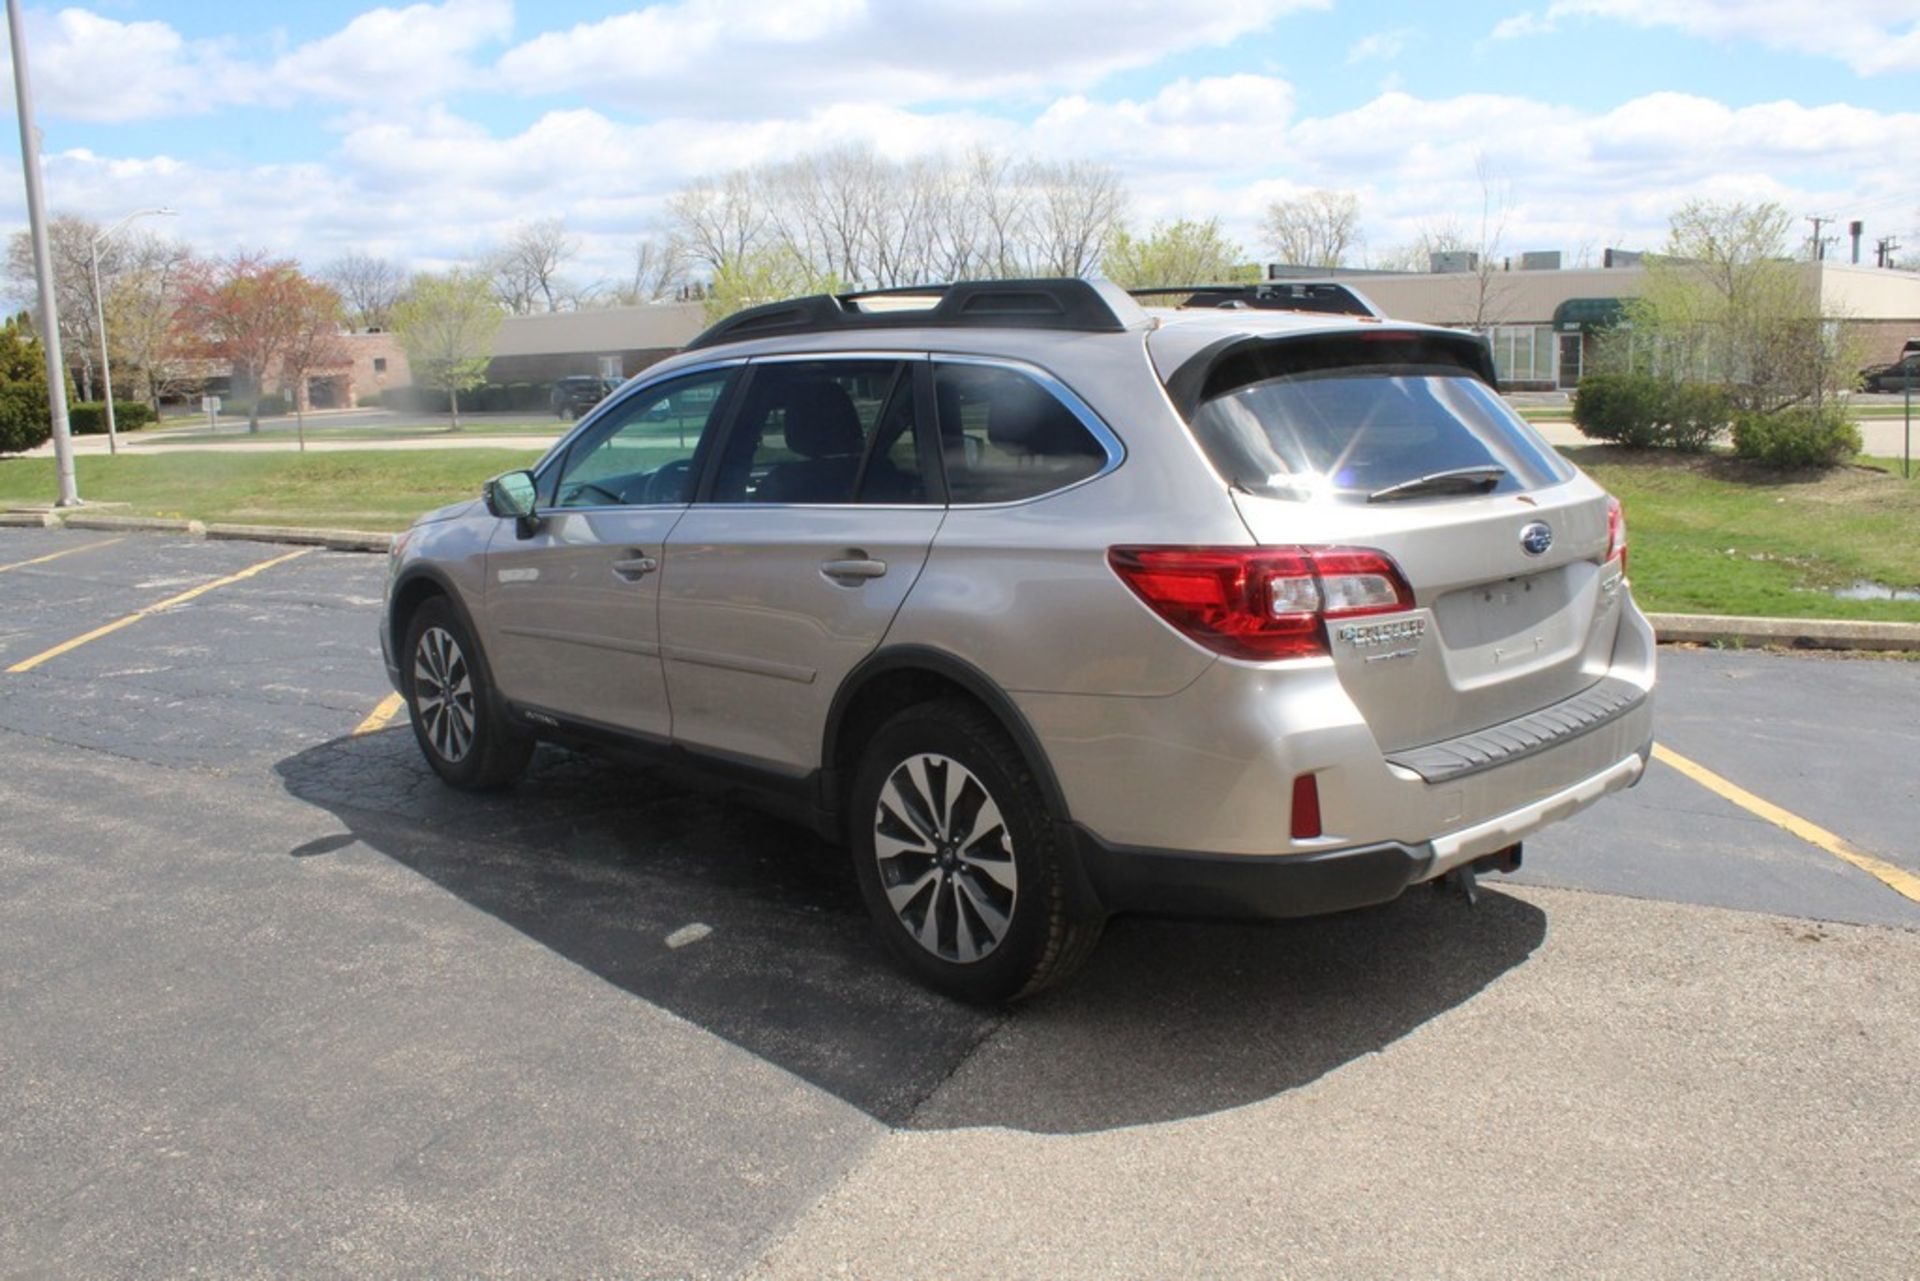 2015 SUBURU OUTBACK AWD 3.6R SPORT UTILITY VEHICLE VIN: 4S4BSENC3F3330429 3.6L 6-CYLINDER, A/T, - Image 4 of 8